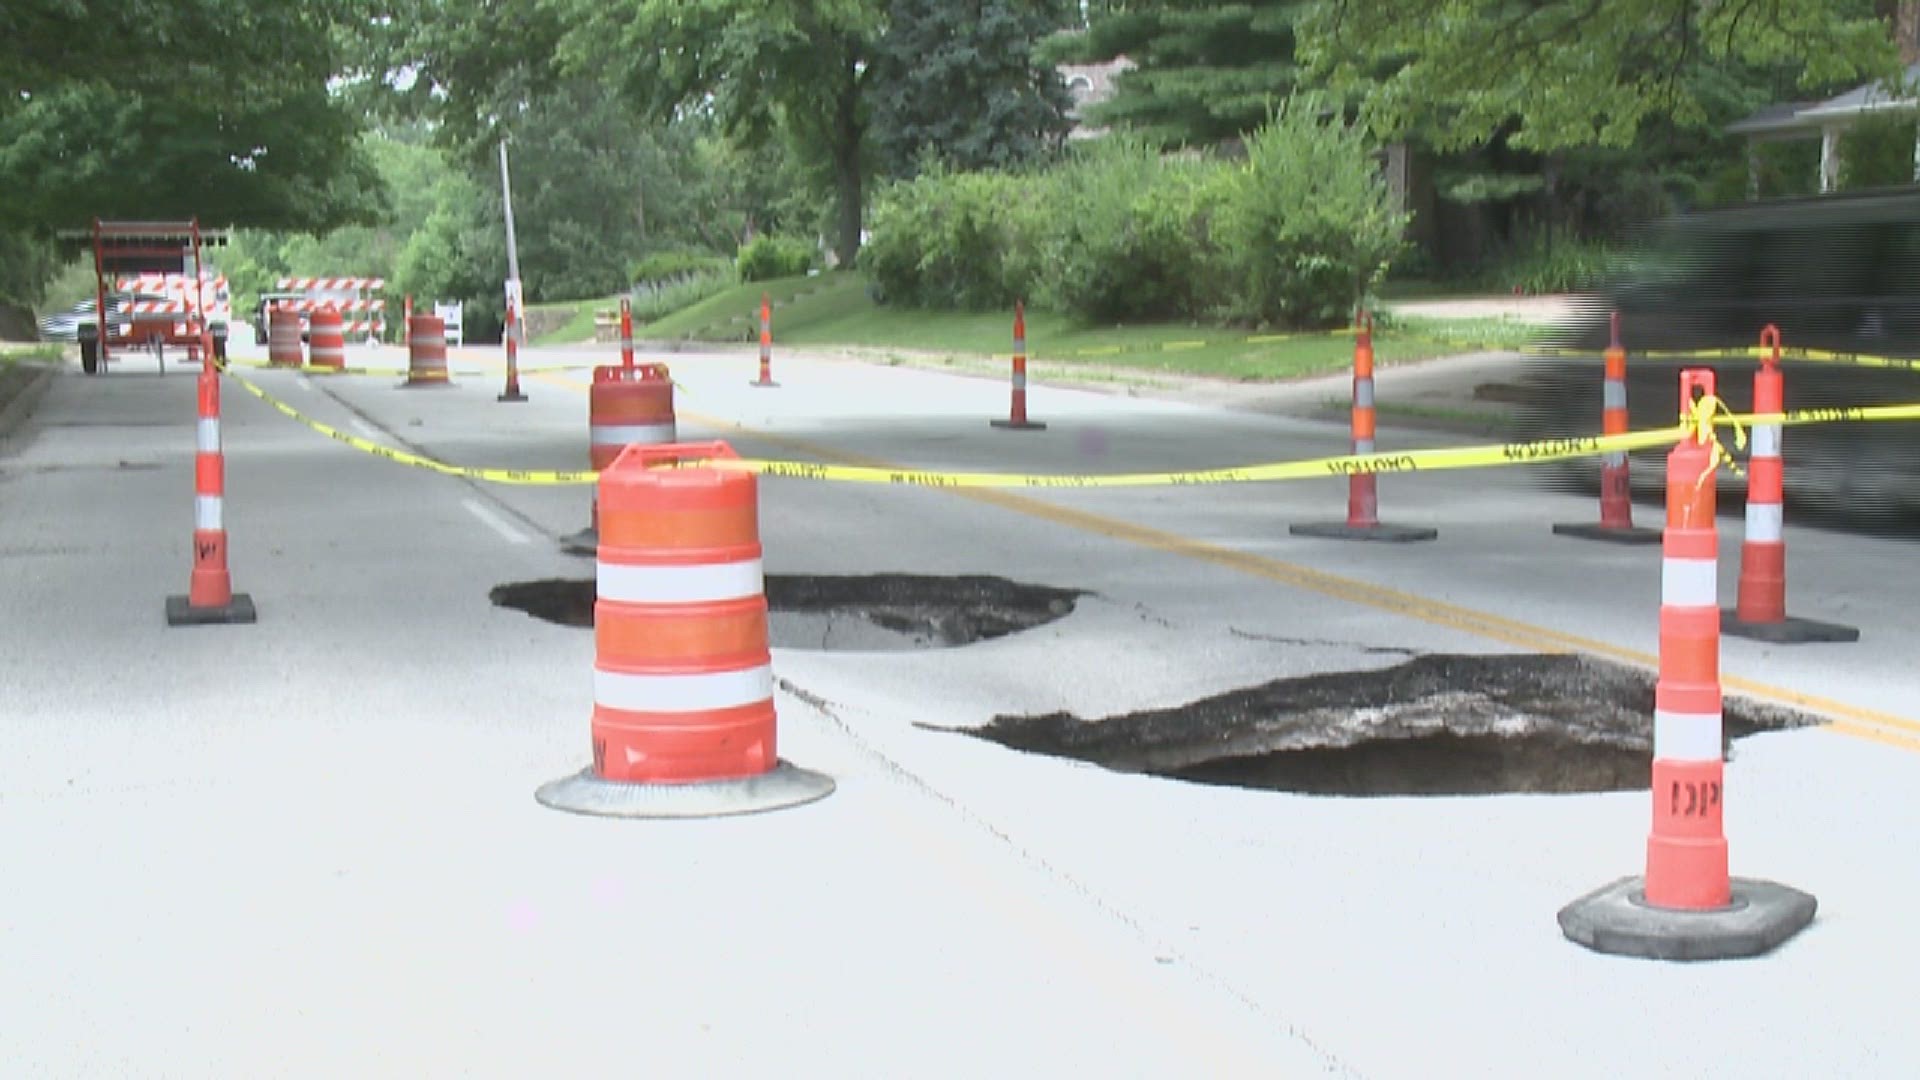 The area between Woodland and Kenwood is closed on both sides after the sinkholes started creeping across the road.